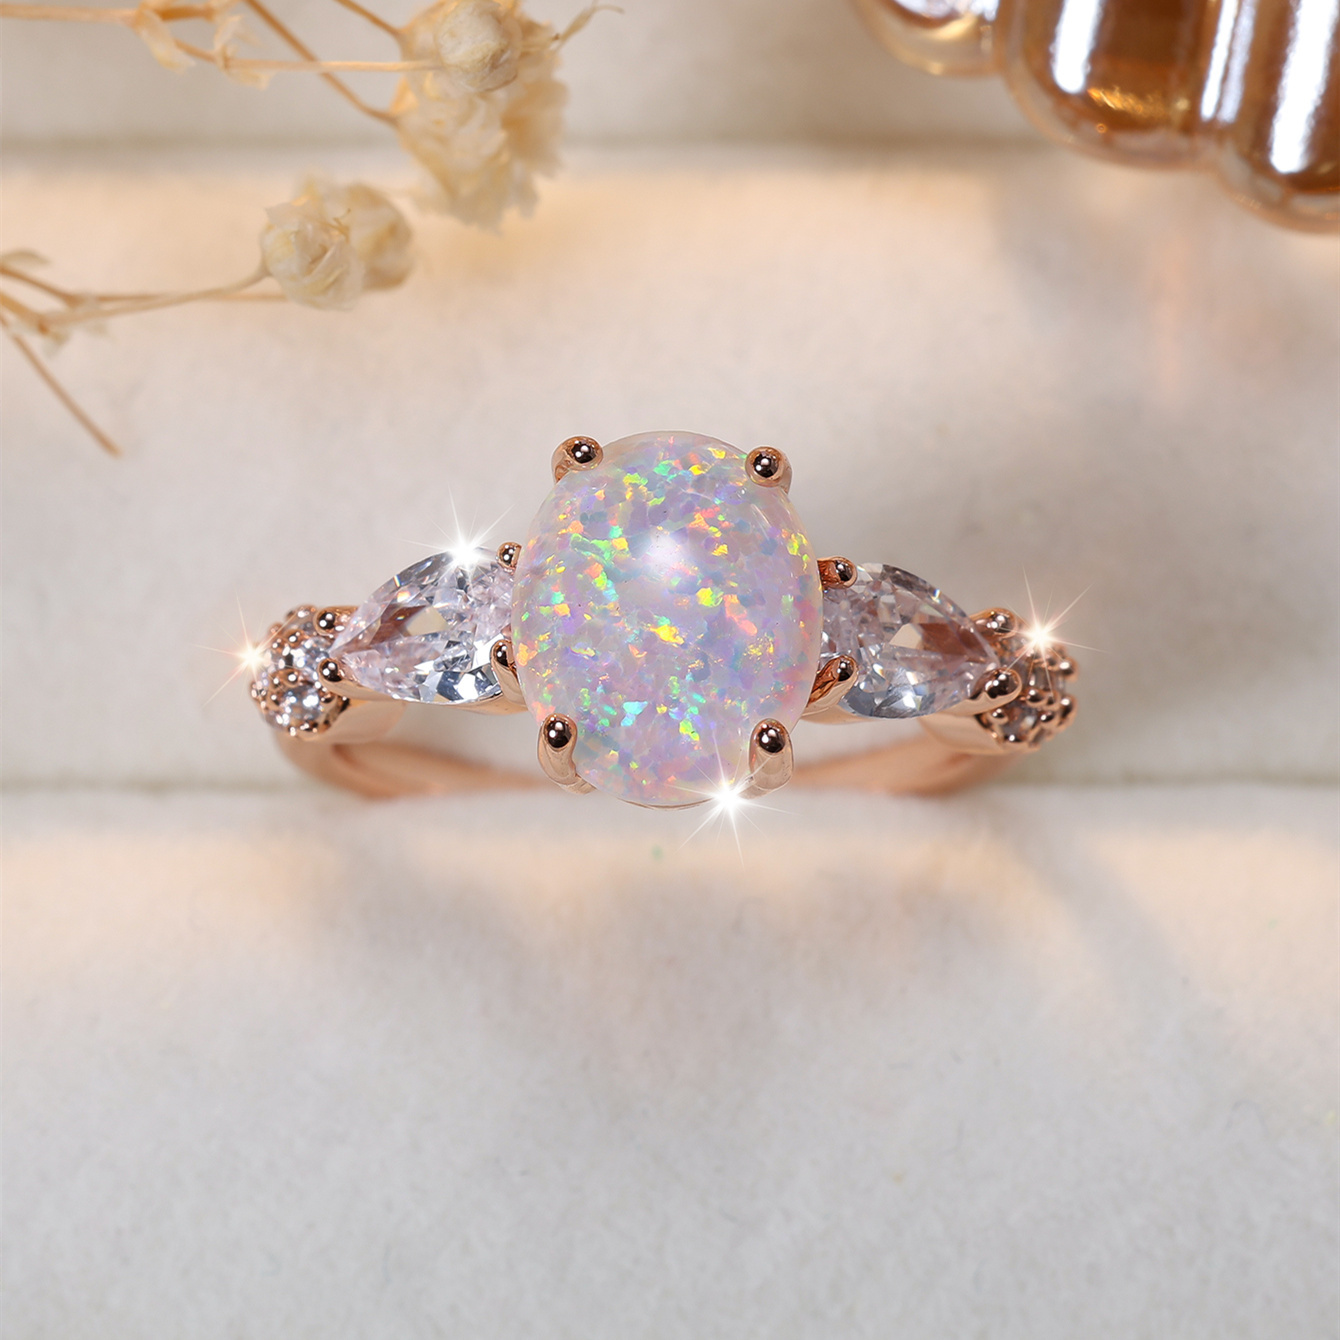 

Luxury Shiny Round White Opal Women's Engagement Ring For Wife Girlfriend Romantic Valentine's Day Gift